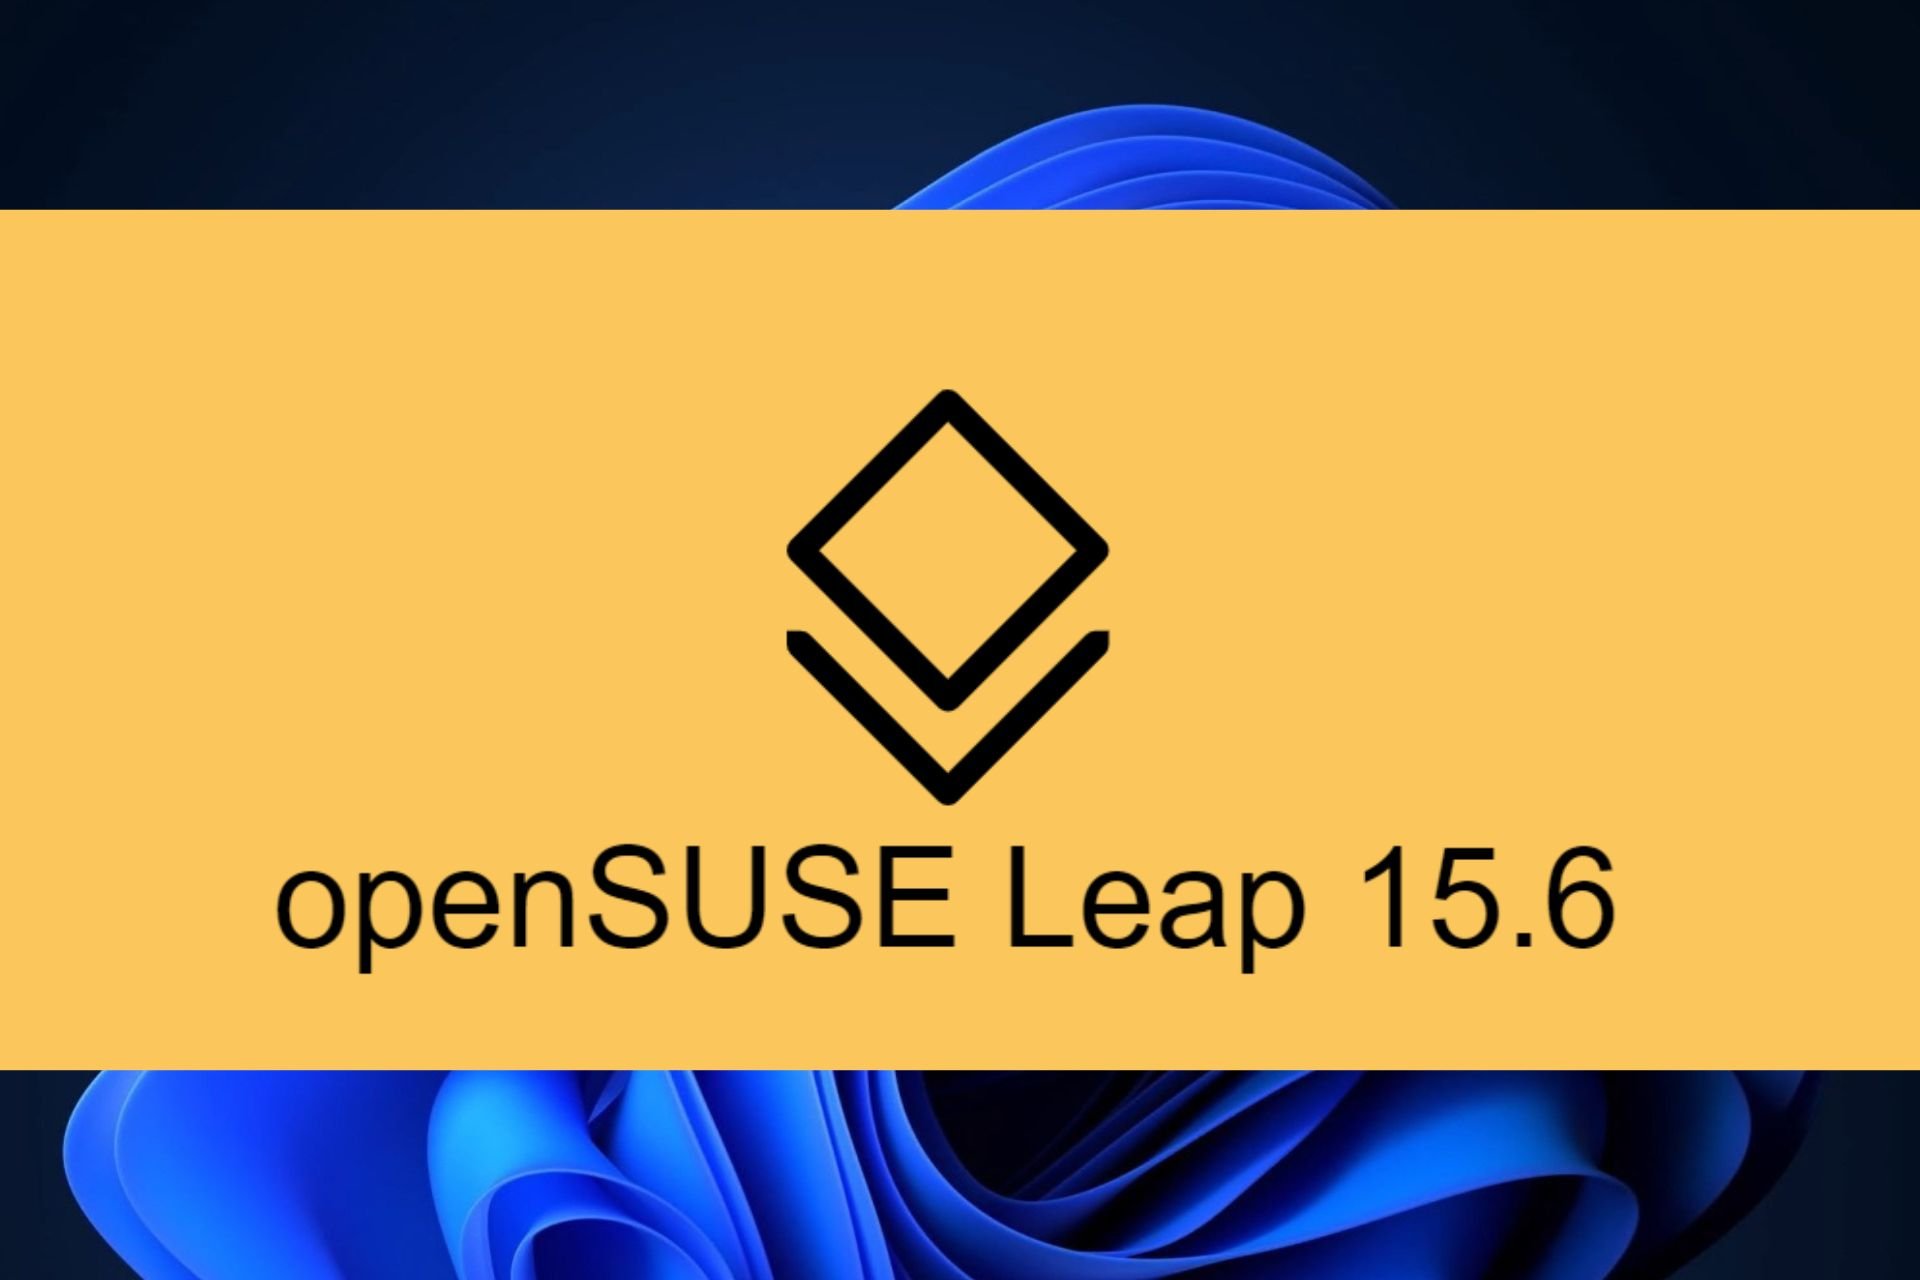 openSUSE Leap 15.6